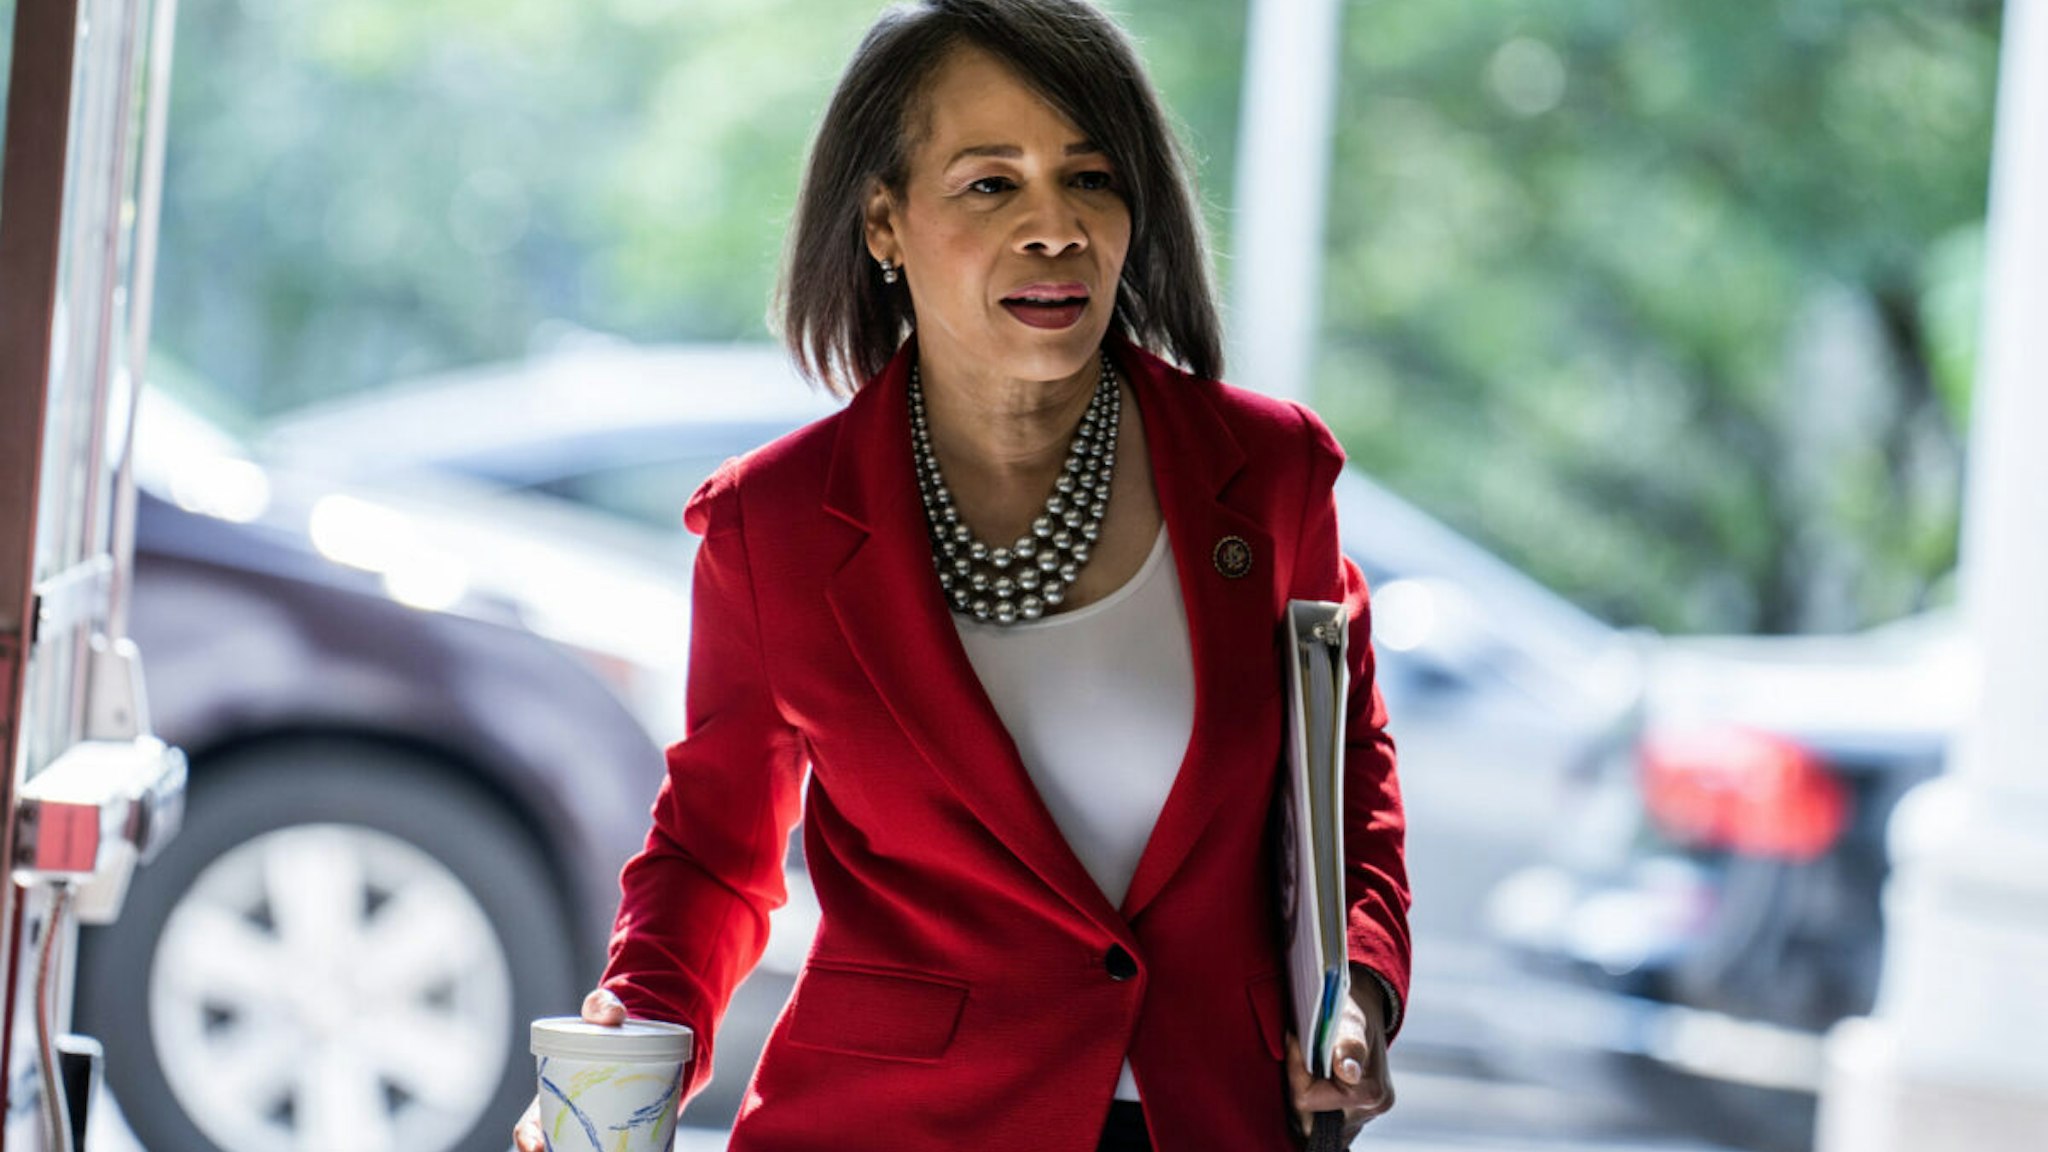 UNITED STATES - MAY 24: Rep. Lisa Blunt Rochester, D-Del., arrives to Rayburn Building on Wednesday, May 24, 2023.